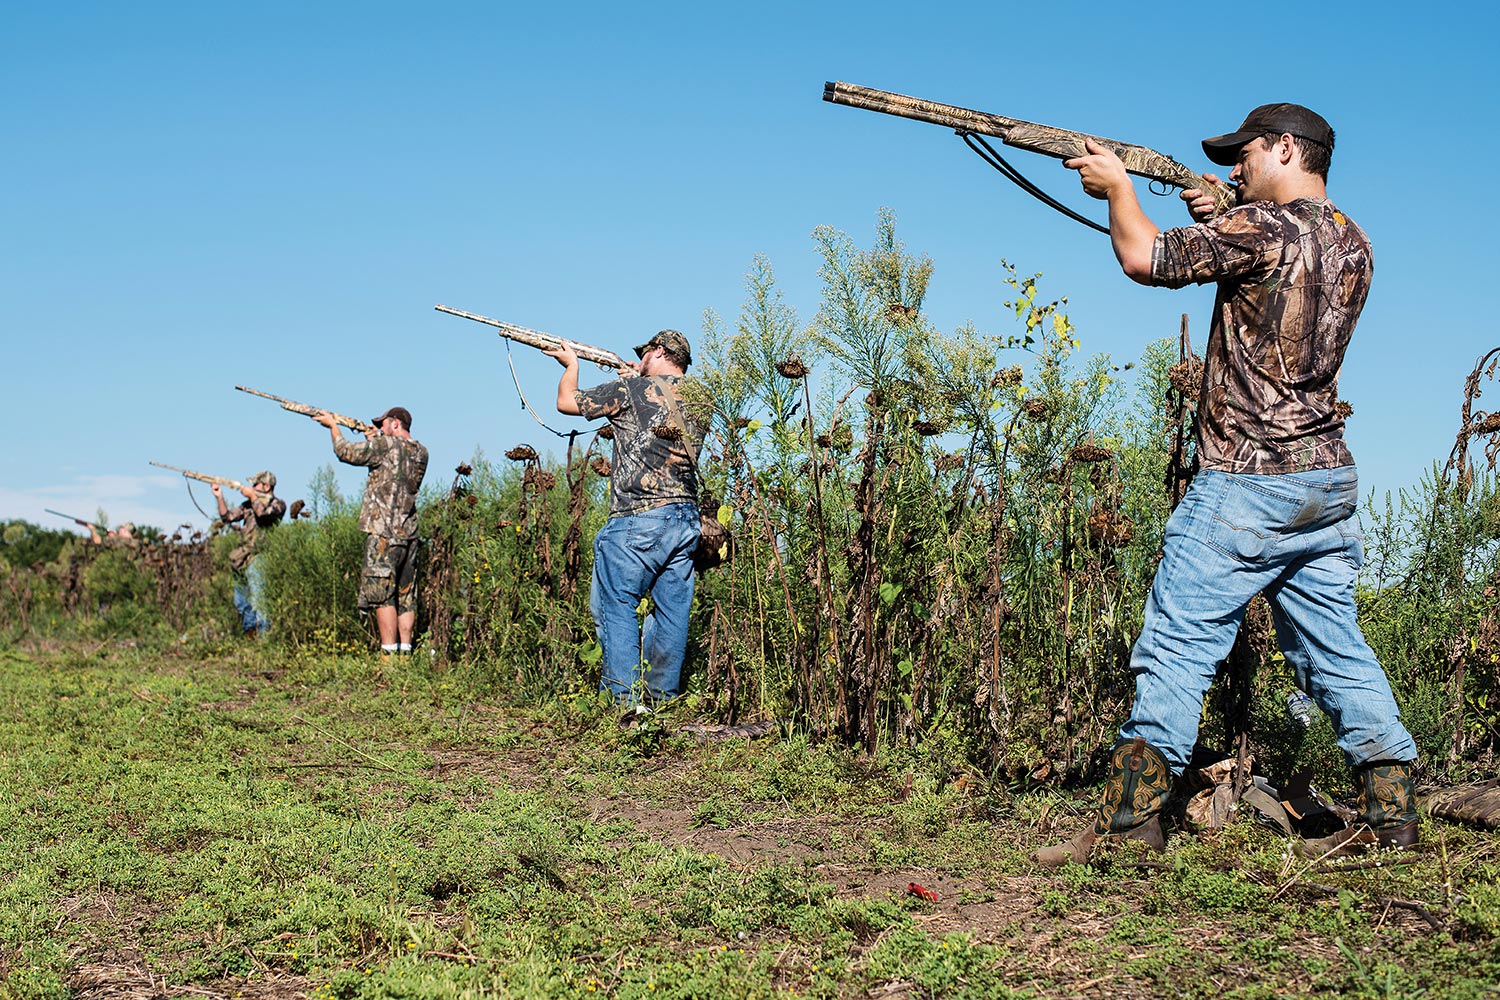 dove hunters with raised shotguns line the edge of a brown sunflower field